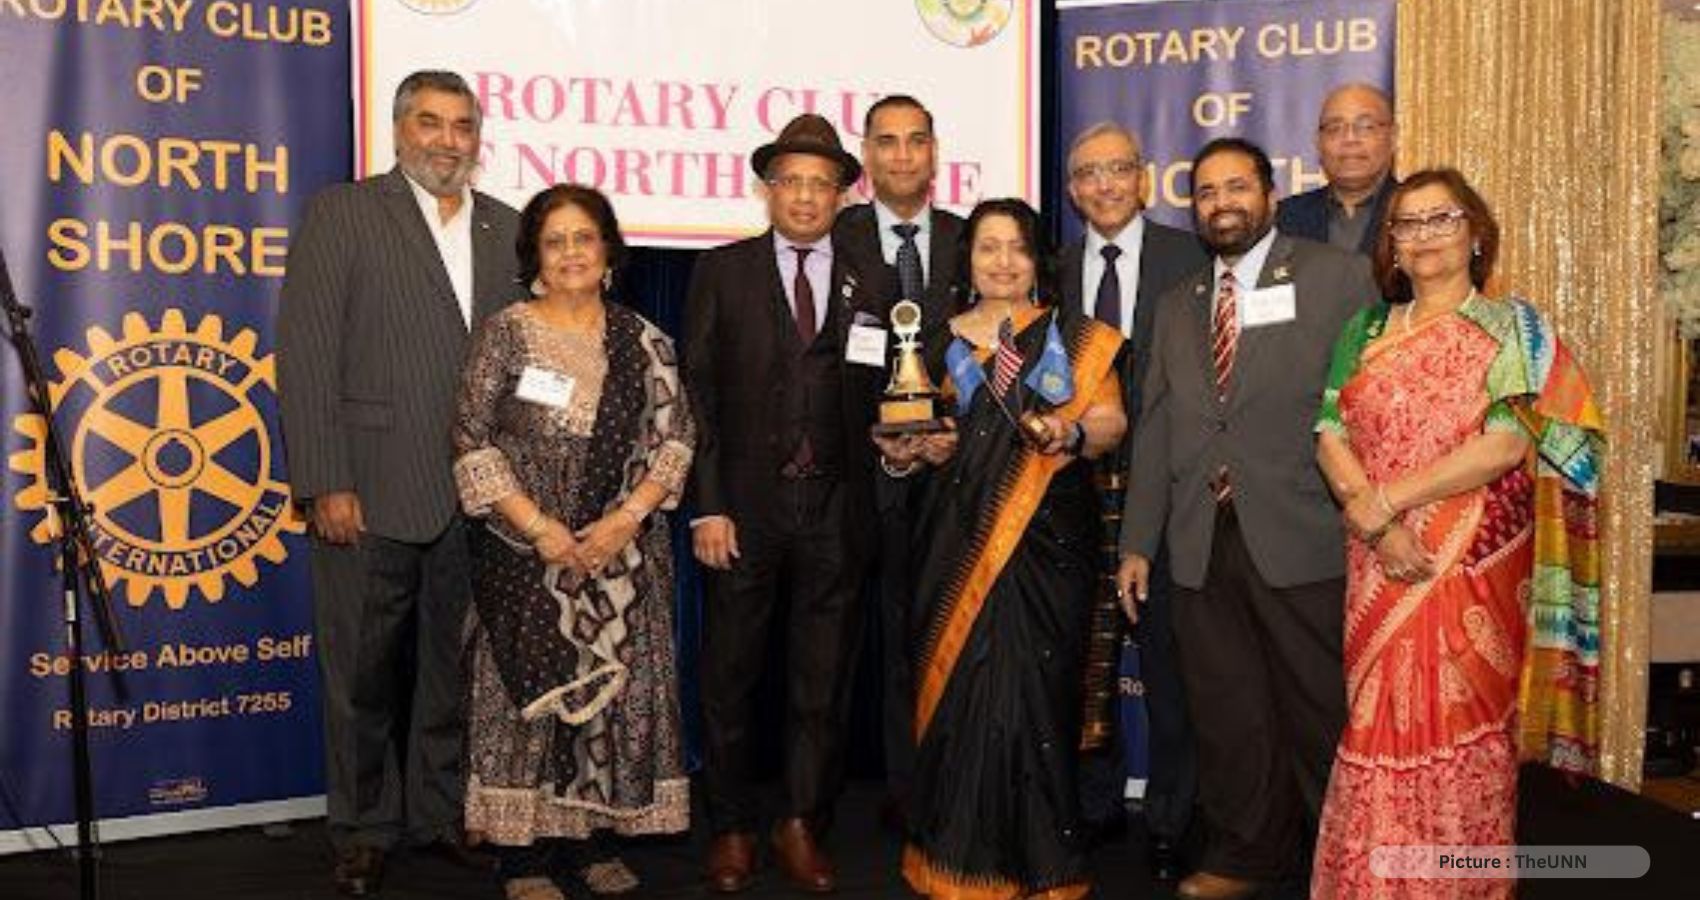 Rotary Club of North Shore District 7255, NY Installed